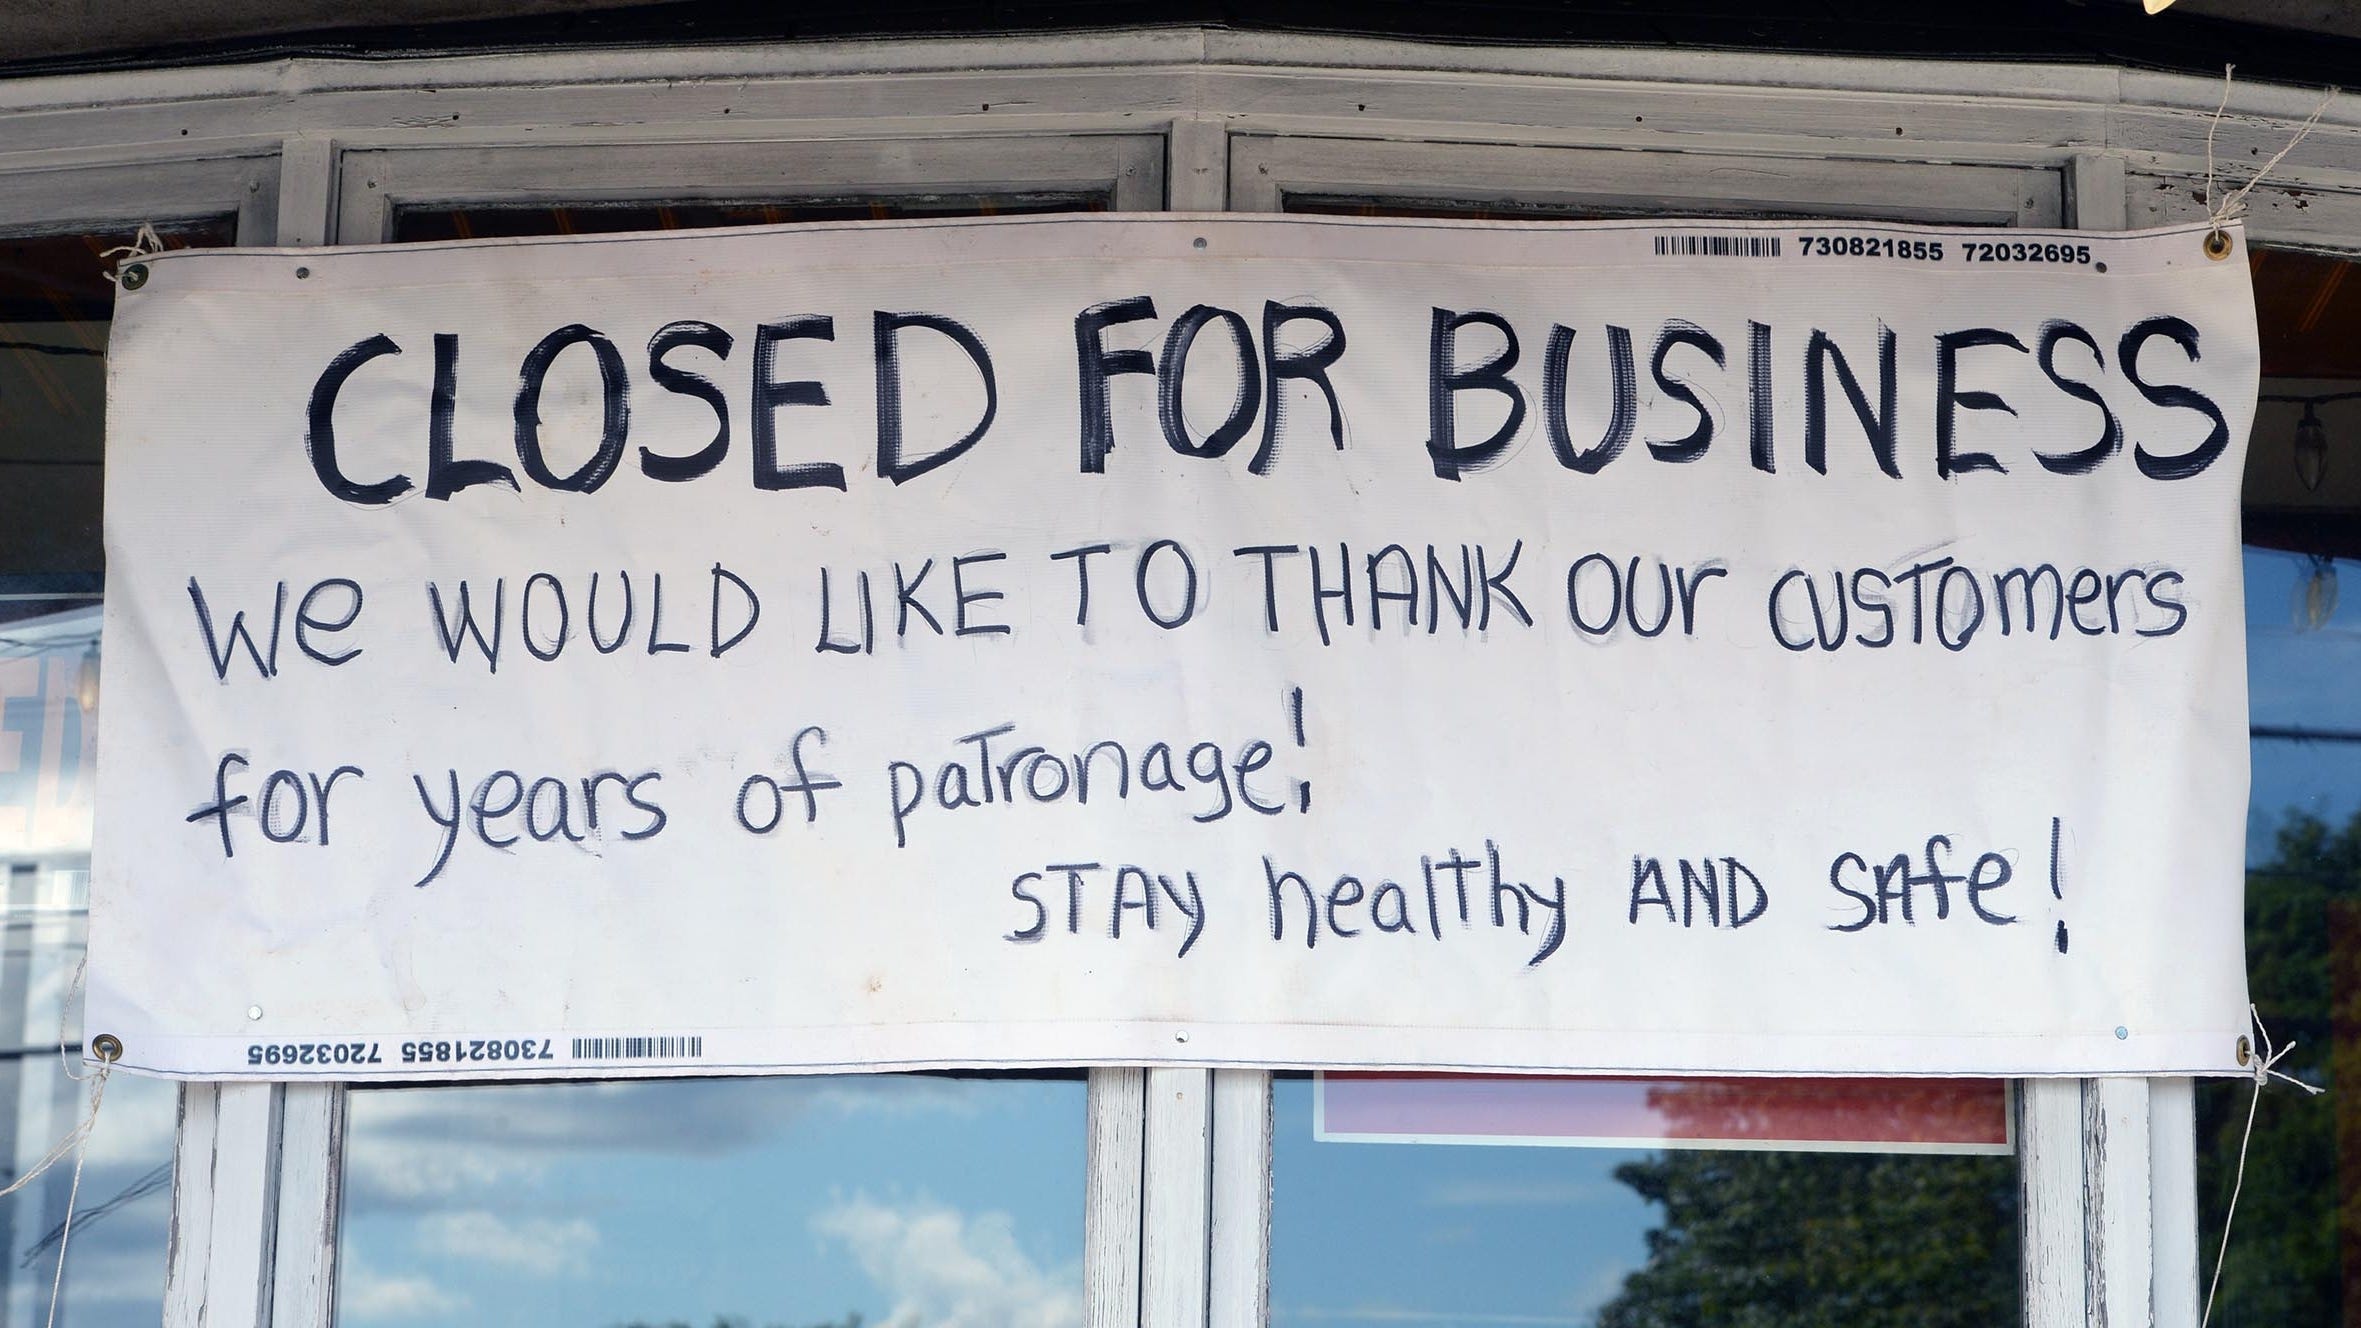 Restaurants, small businesses face closures without COVID19 relief